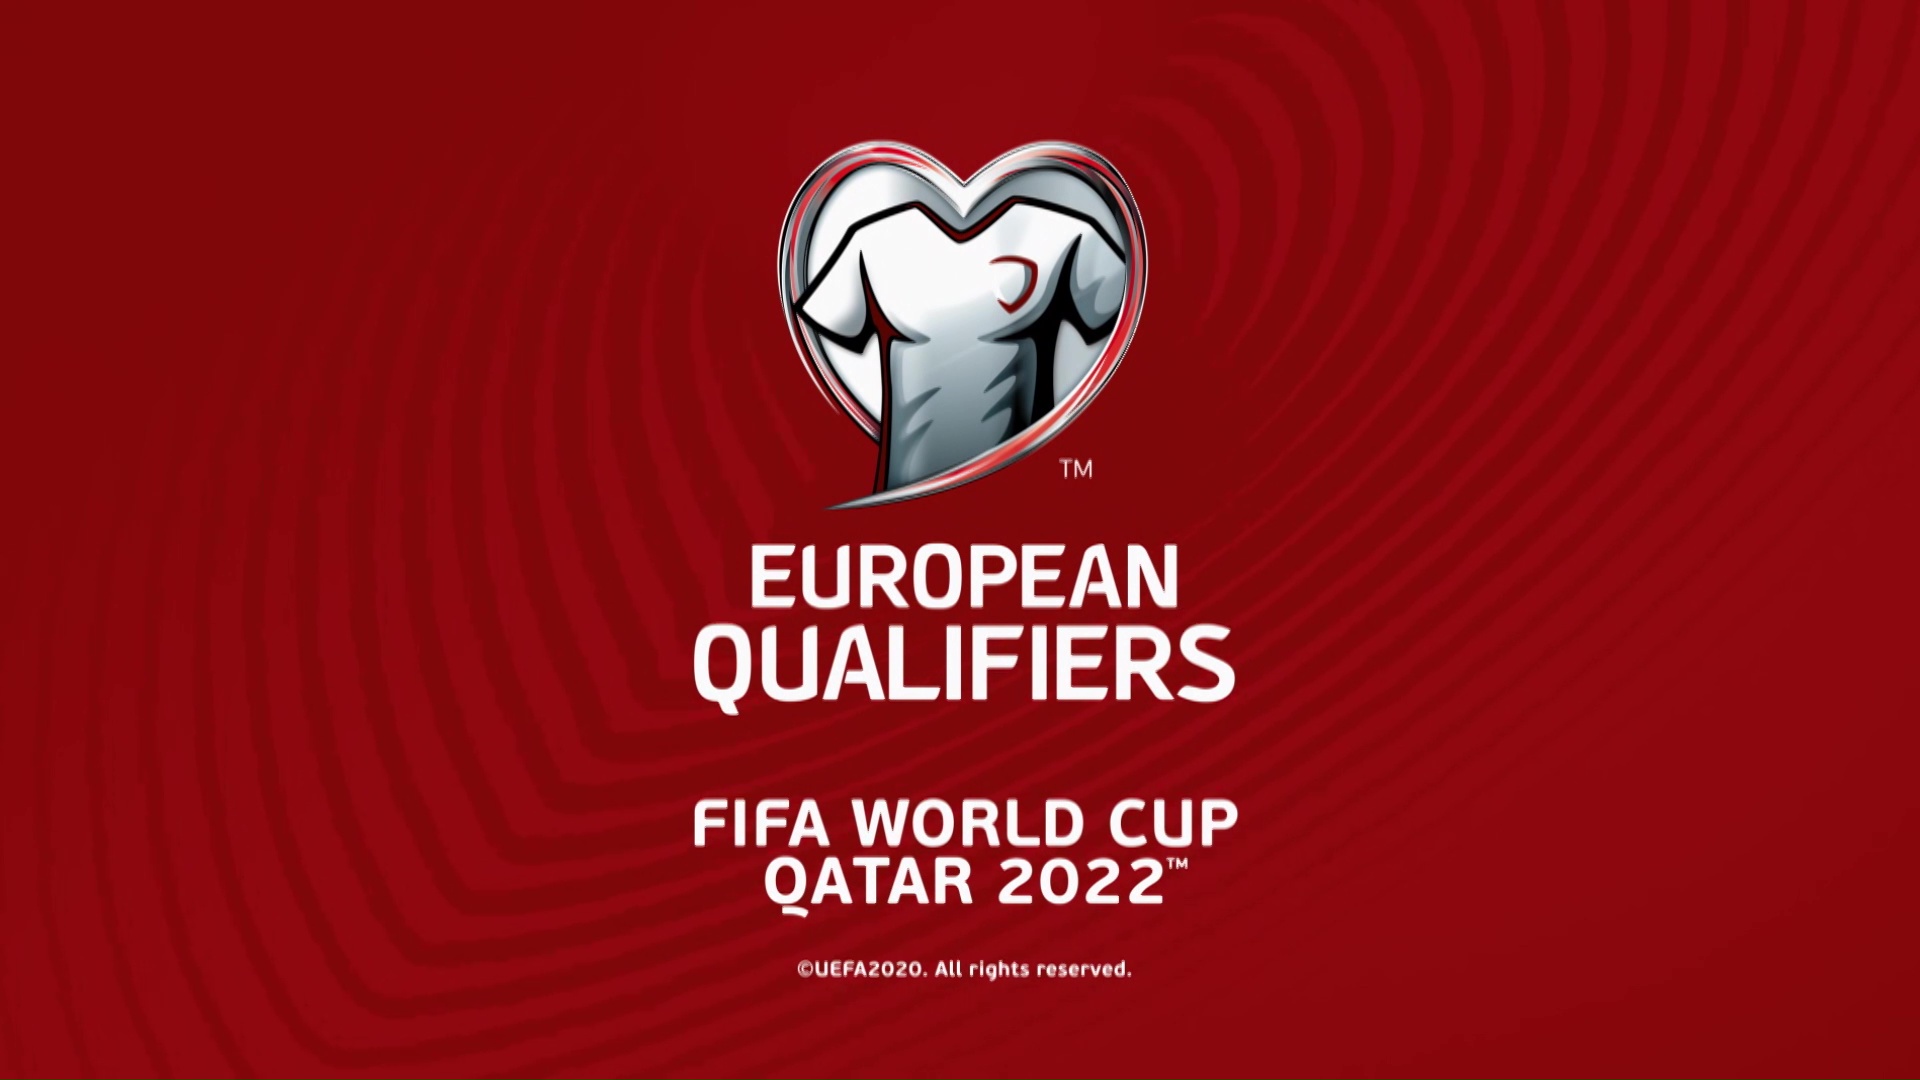 European Qualifiers for 2022 World Cup OPEN TV